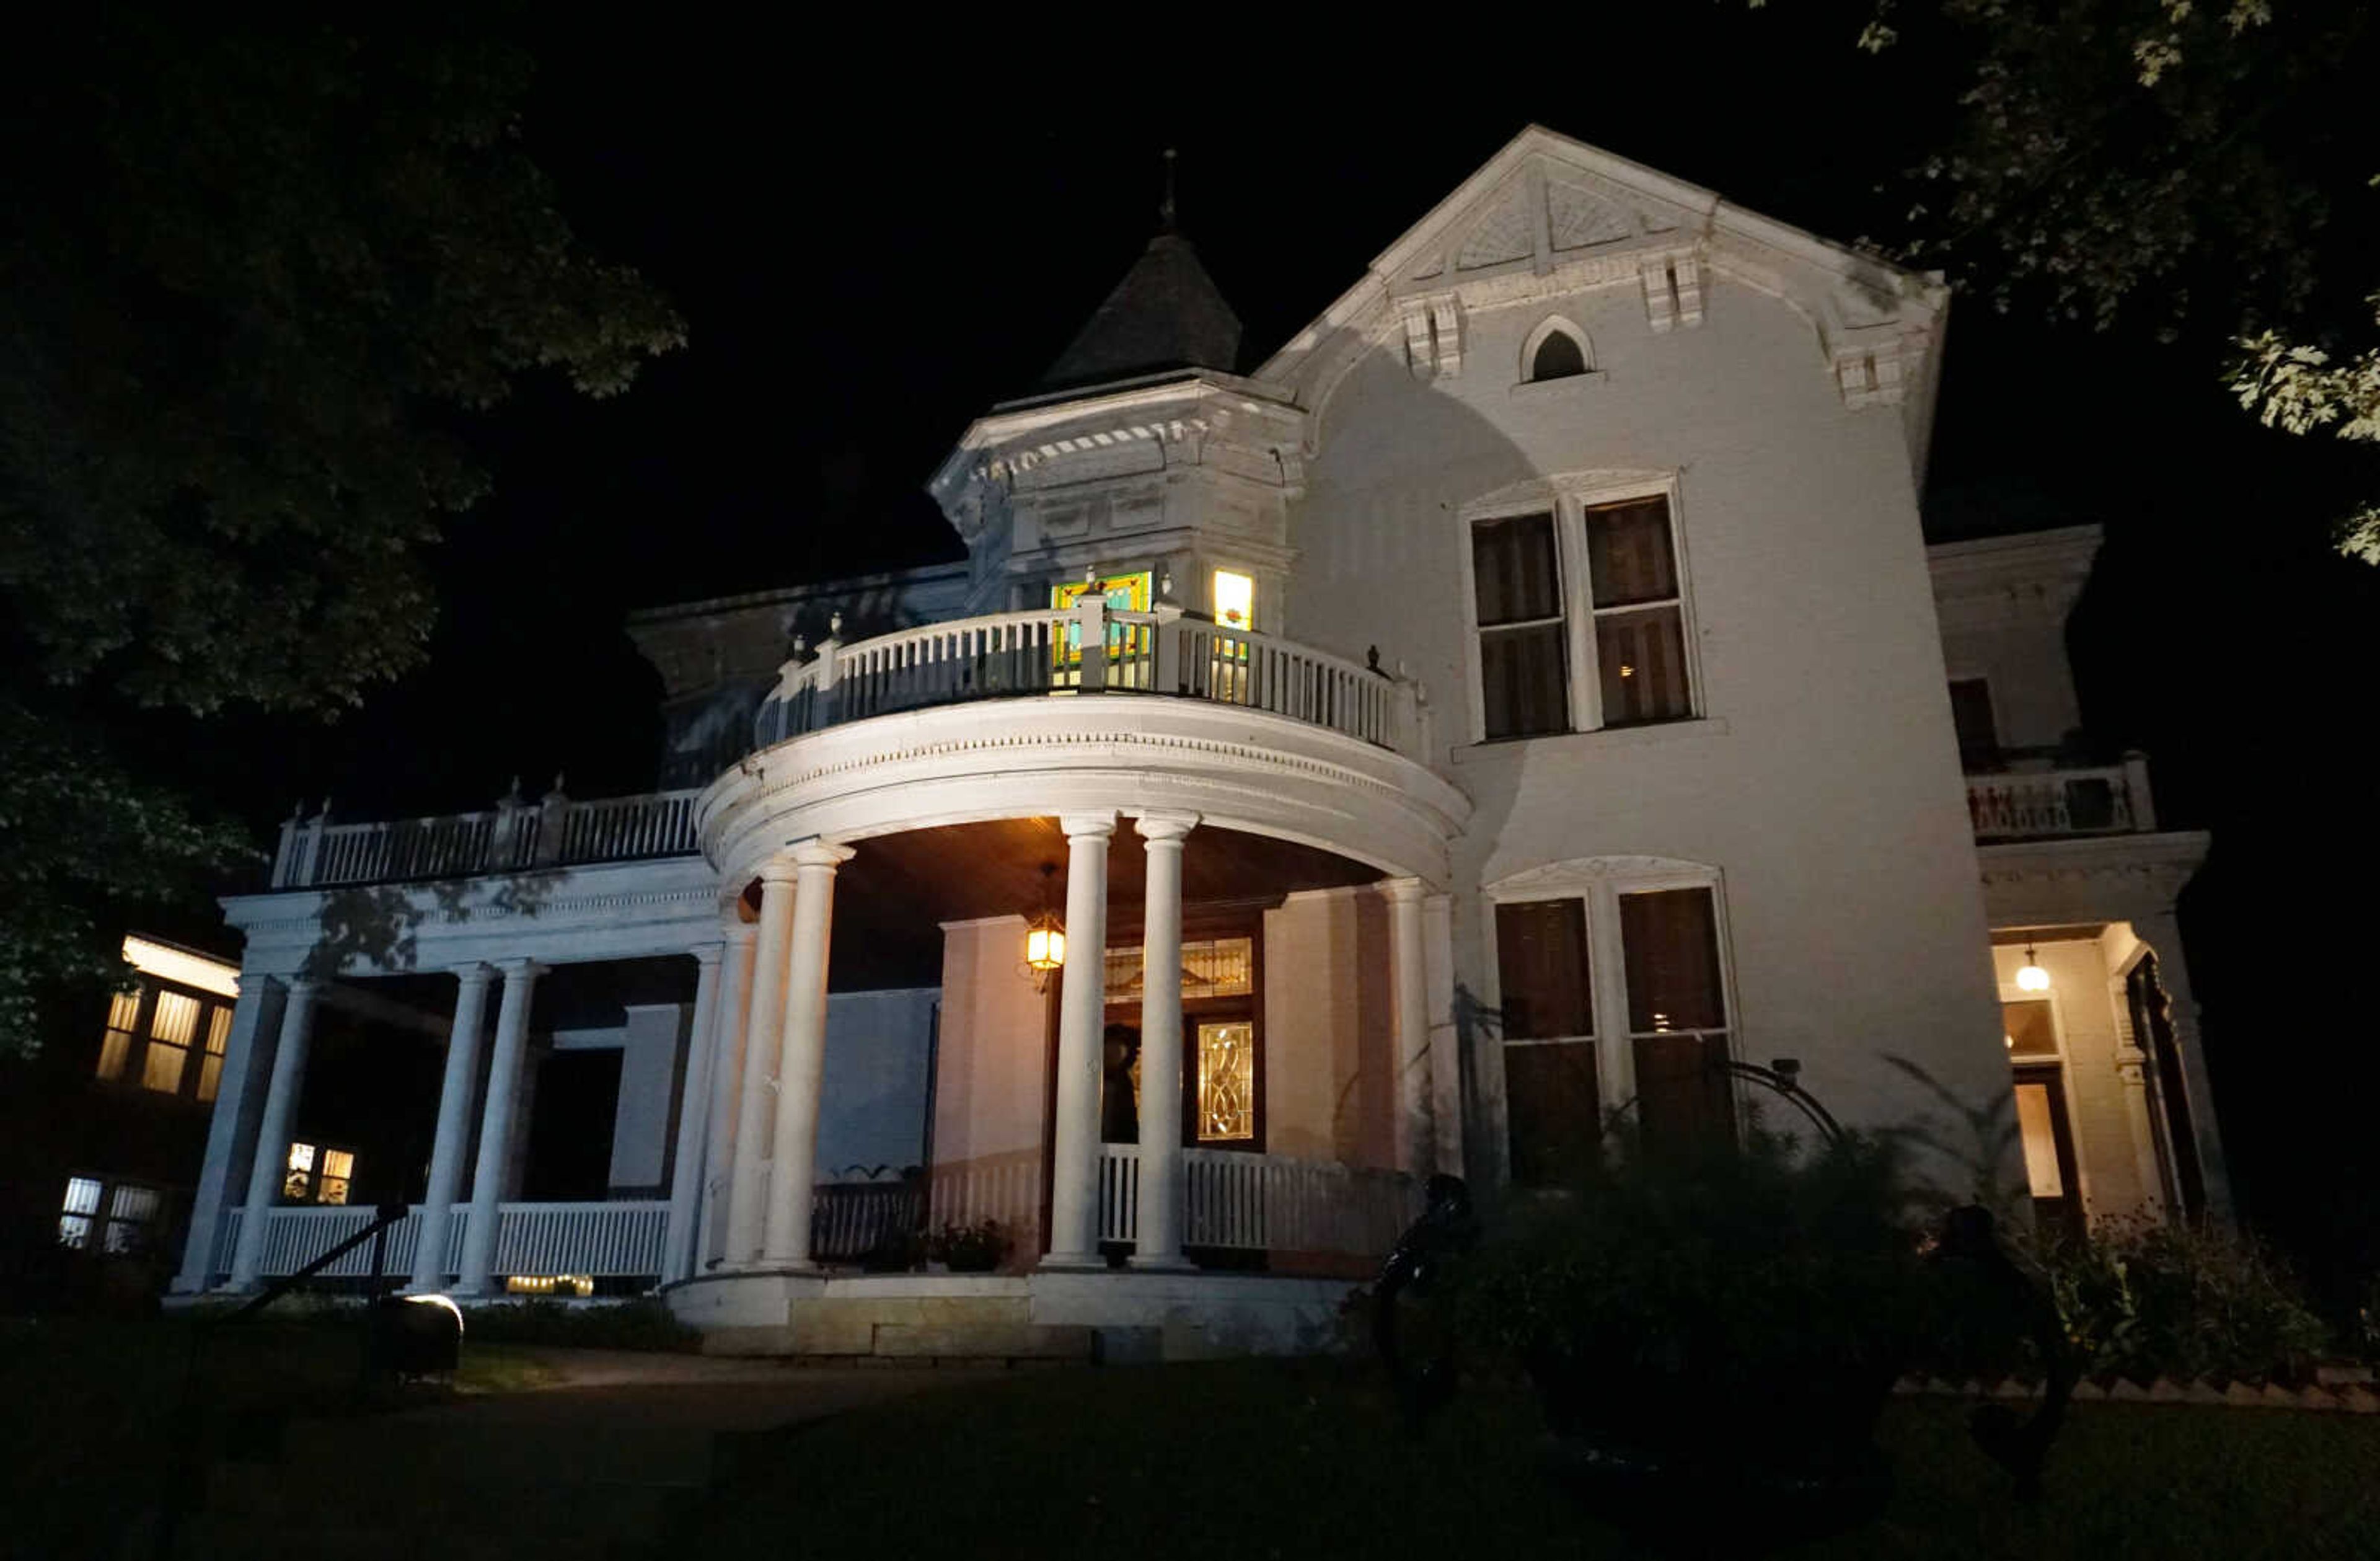 The Glenn House is a historical site in Cape Girardeau with many memories and ghost stories to tell. The house was a stop on the haunted ghost tour offered by SEMO. 